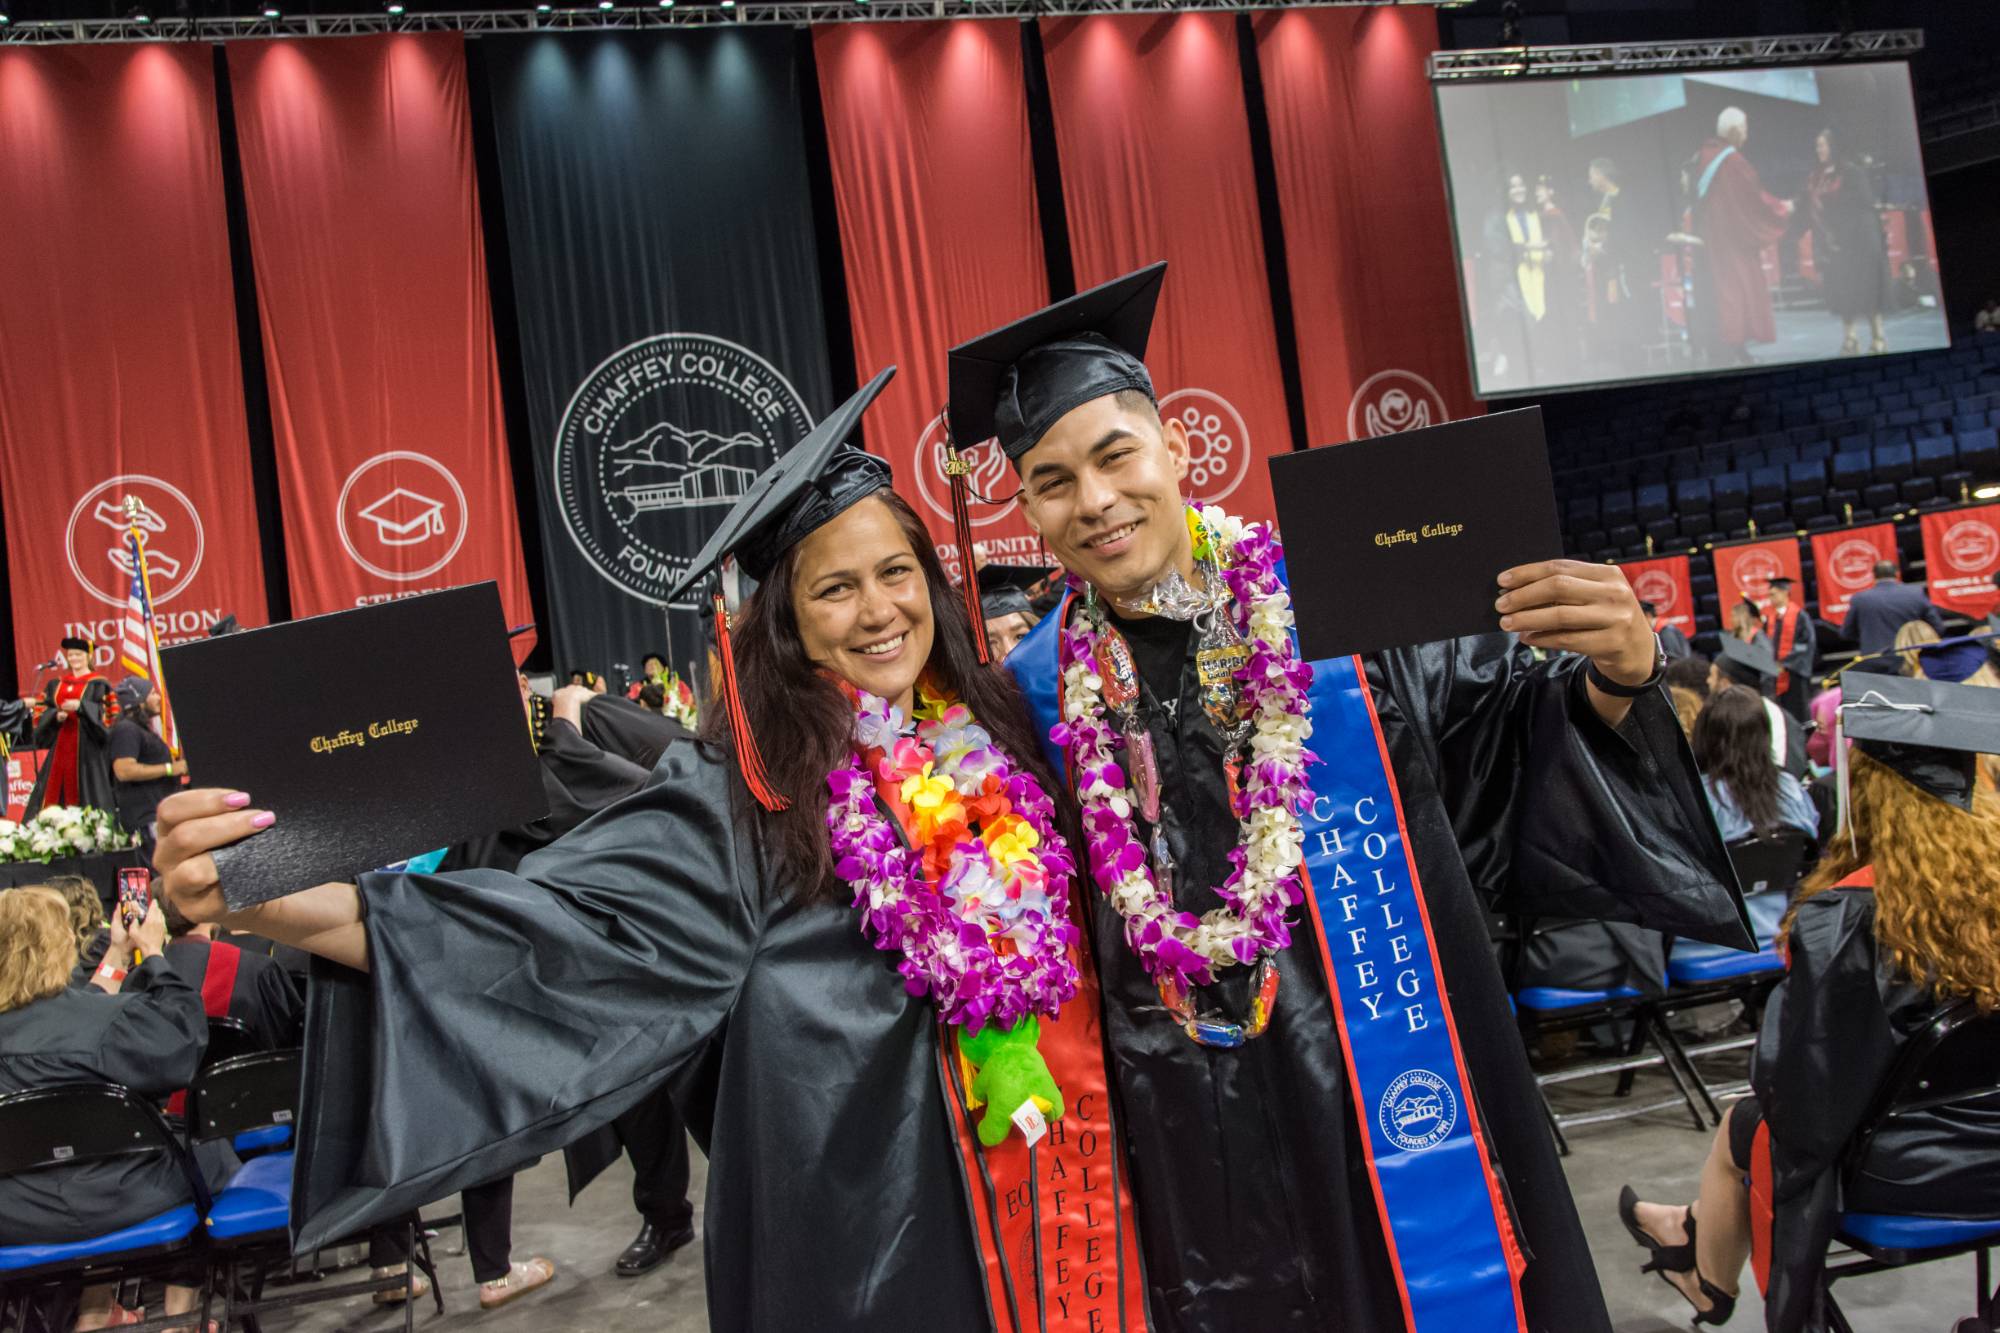 A mother and son graduating from Chaffey hold up diplomas